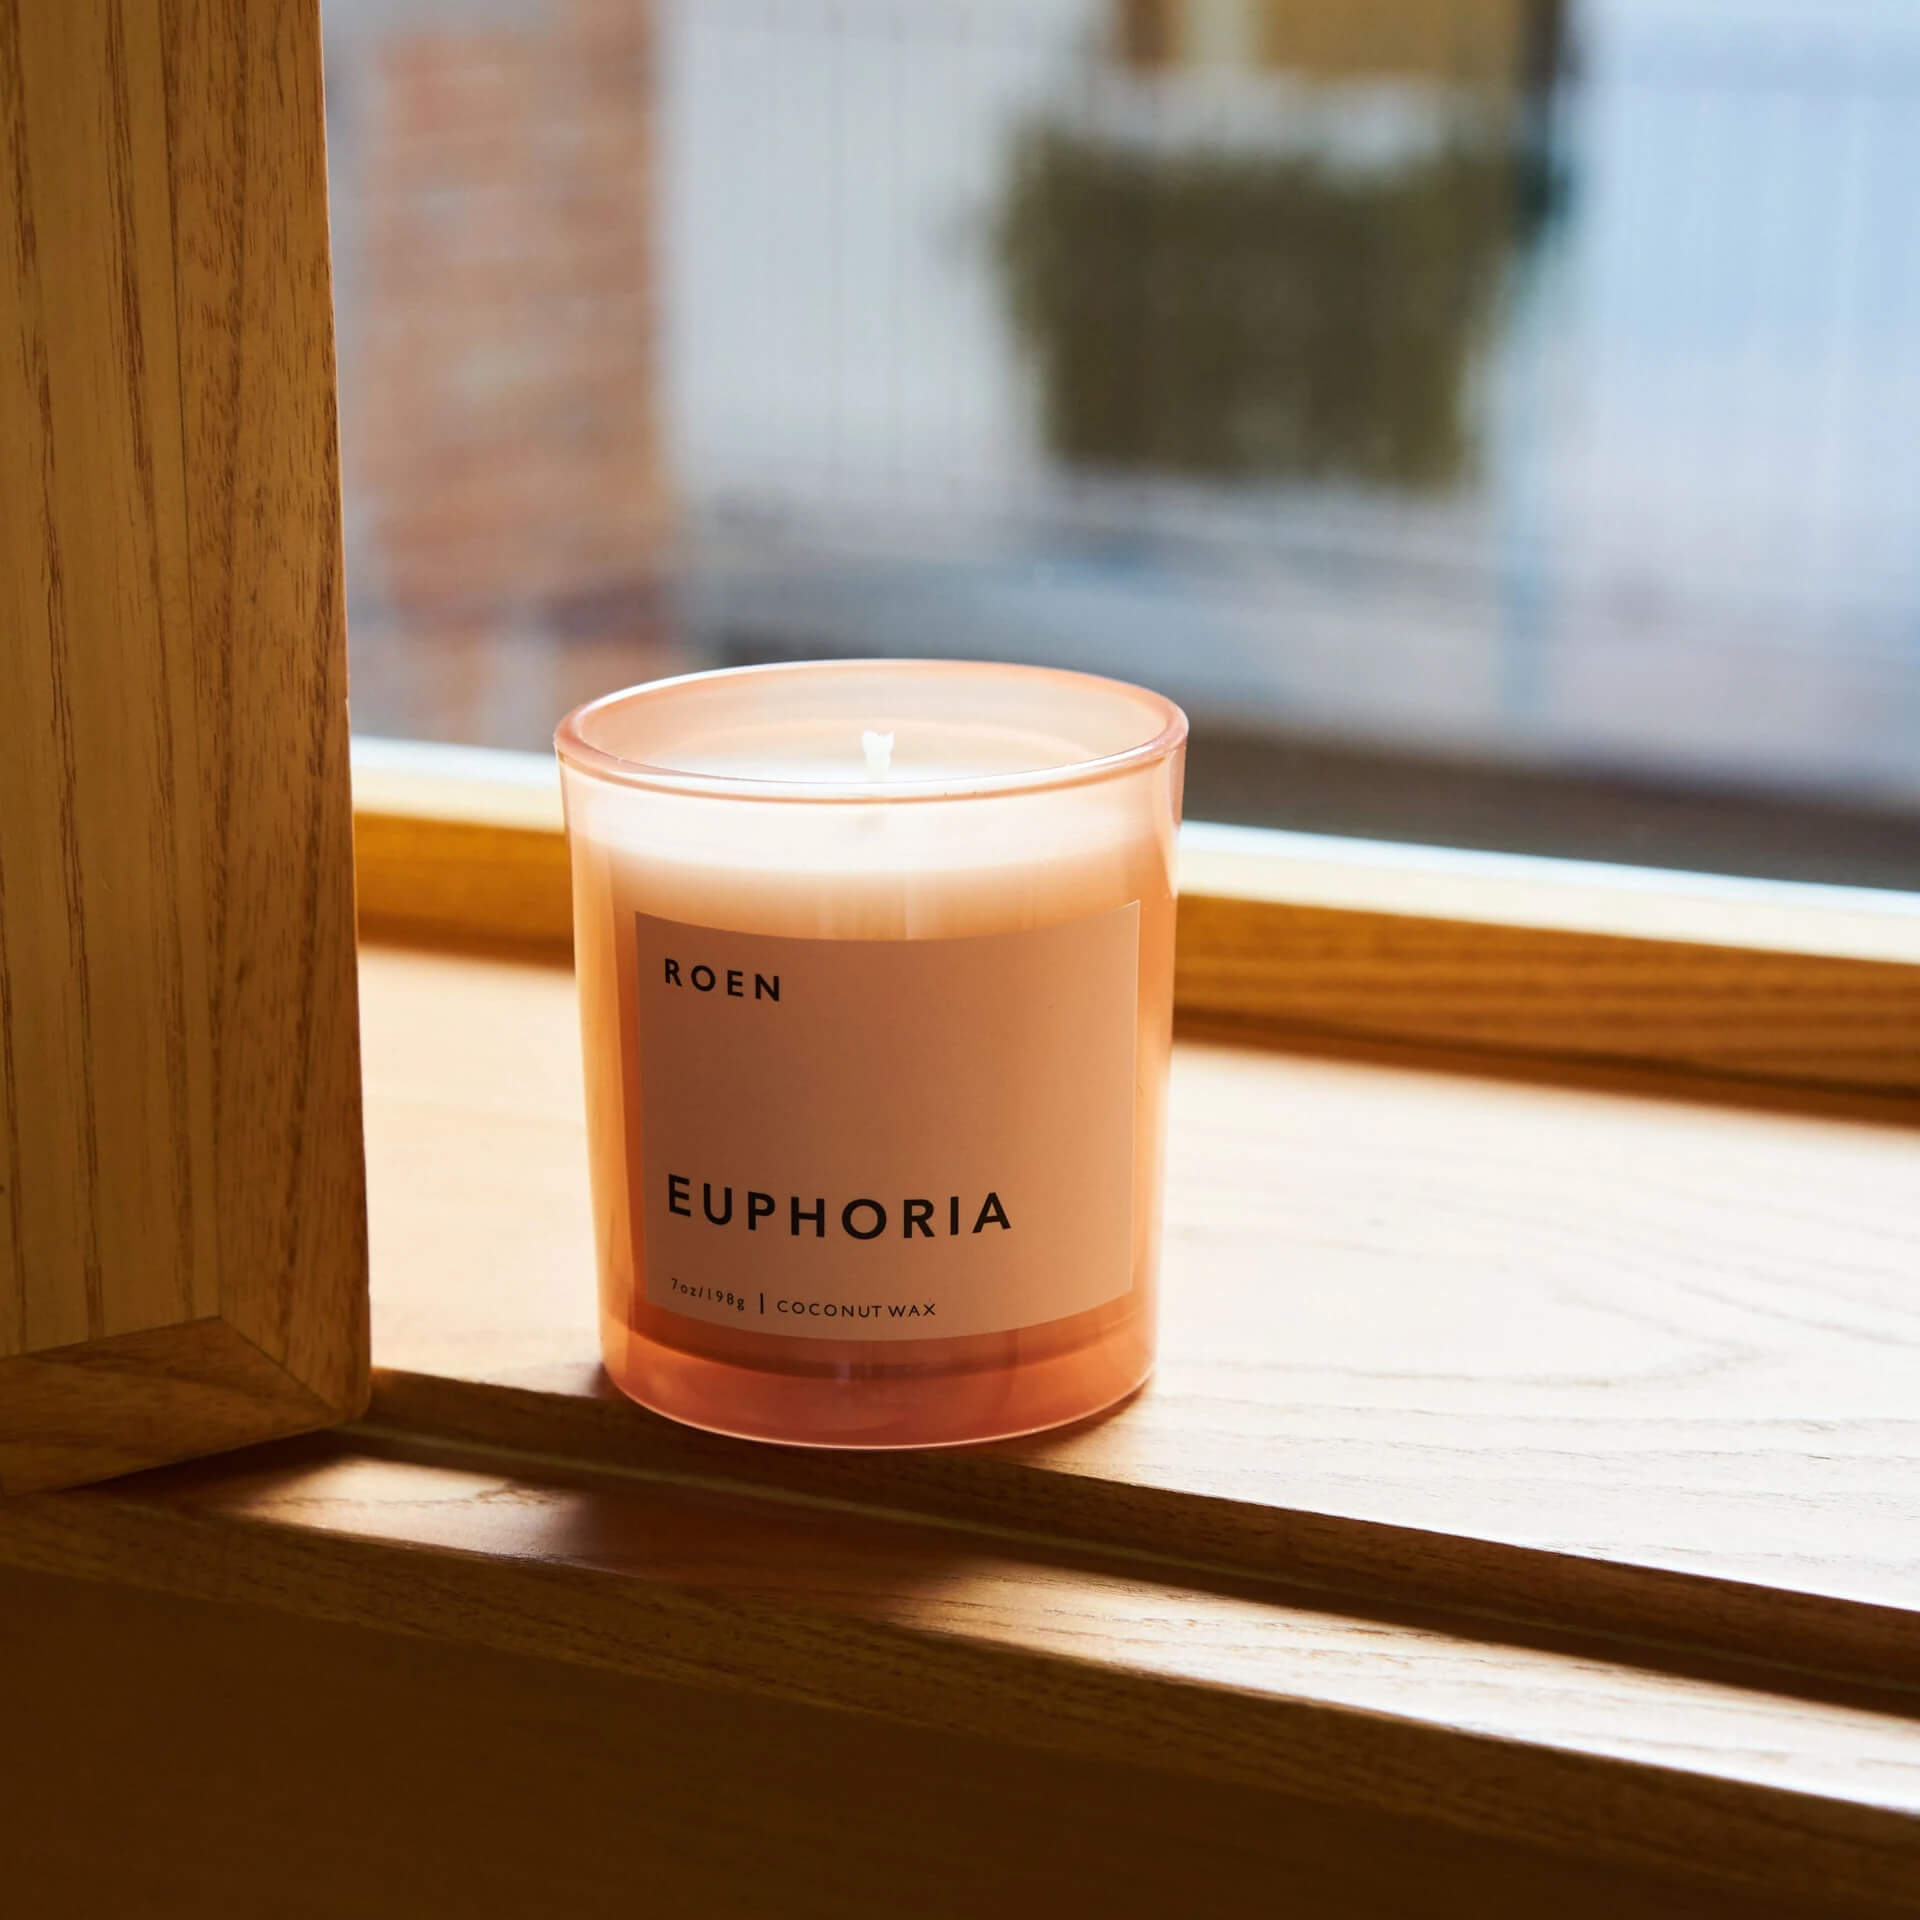 R O E N Euphoria Scented Candle - Osmology Scented Candles & Home Fragrance